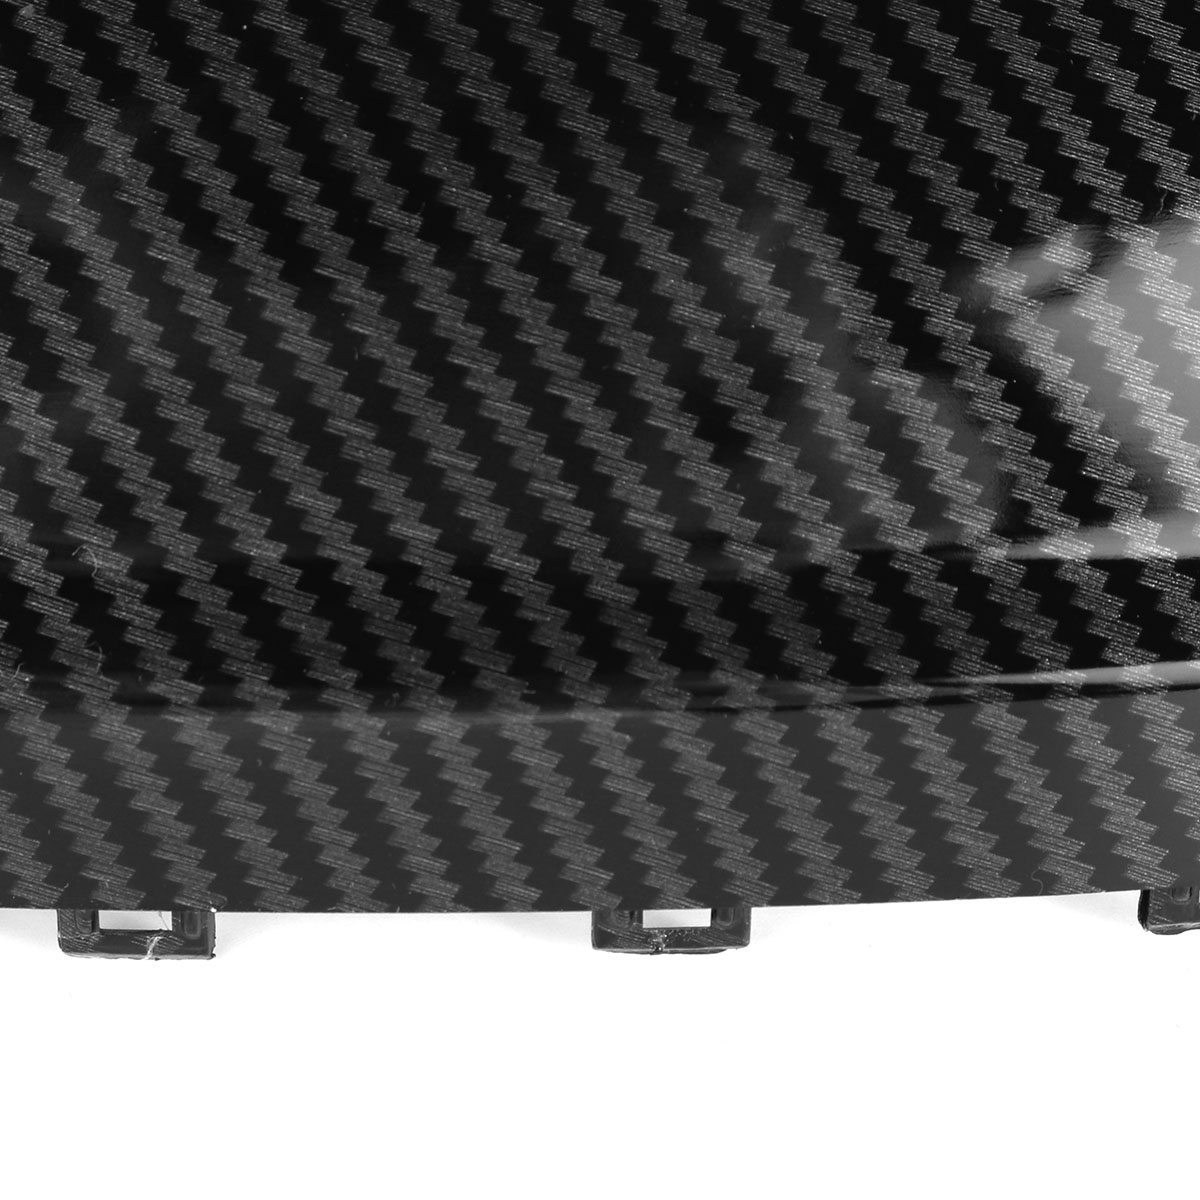 Carbon Fiber Look Door Wing Rearview Mirror Cover Rear View Caps For Opel Vauxhall Astra H  2004-2013